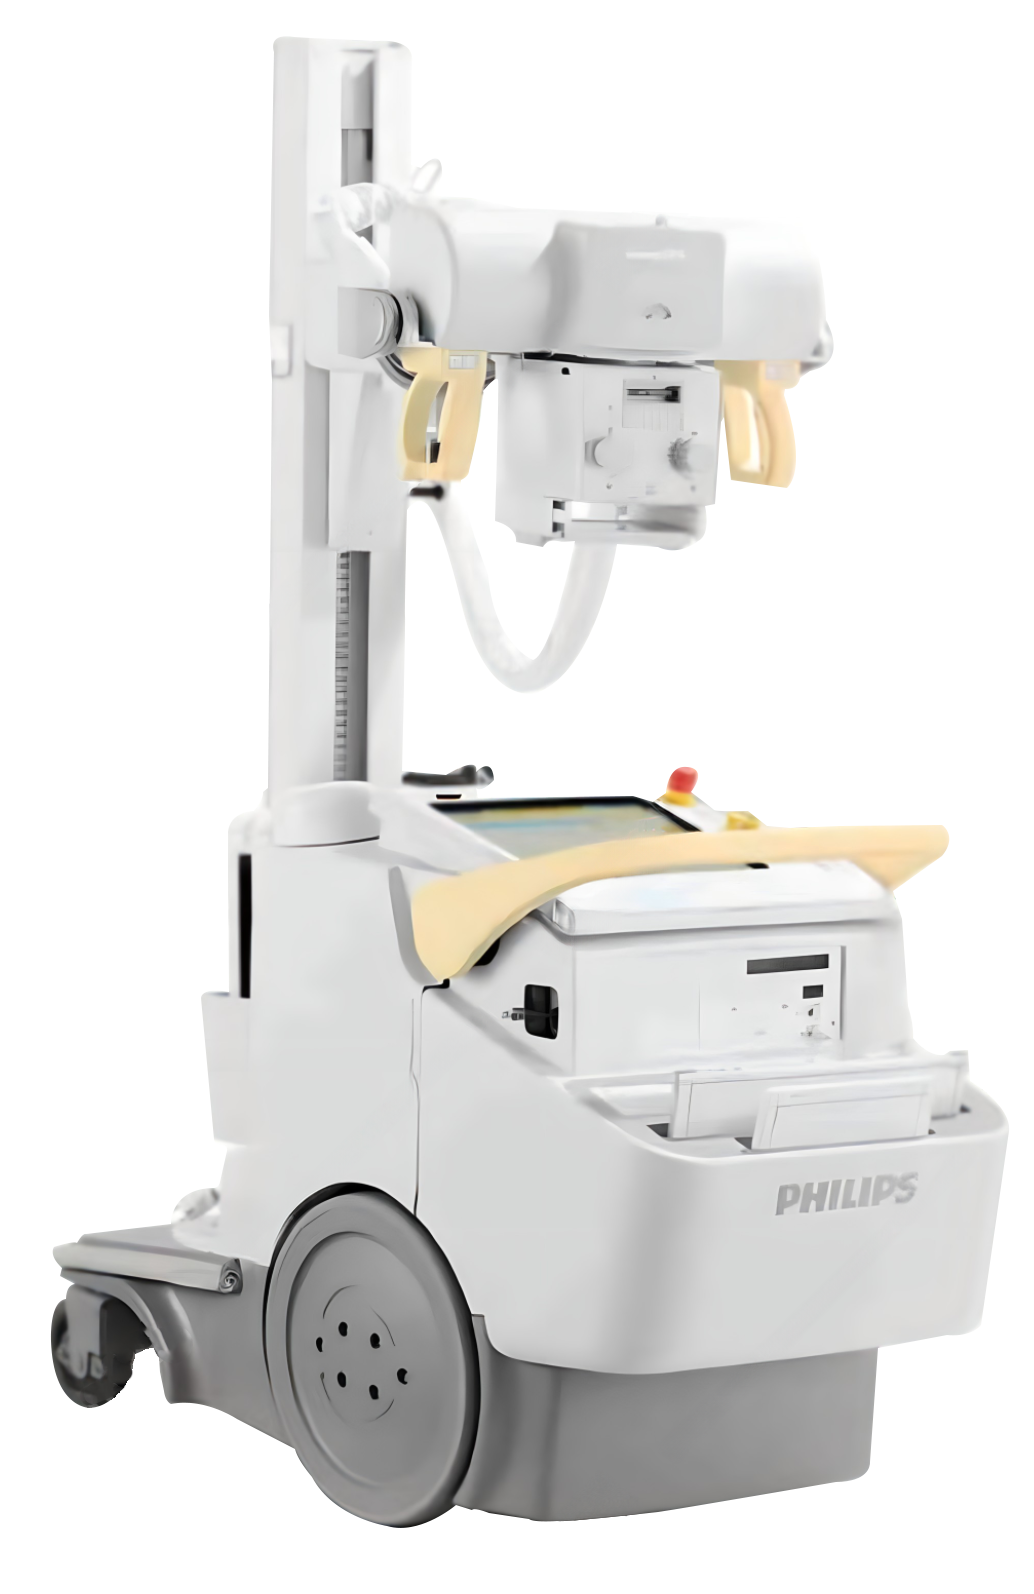 Philips MobileDiagnost wDR Mobile X-Ray